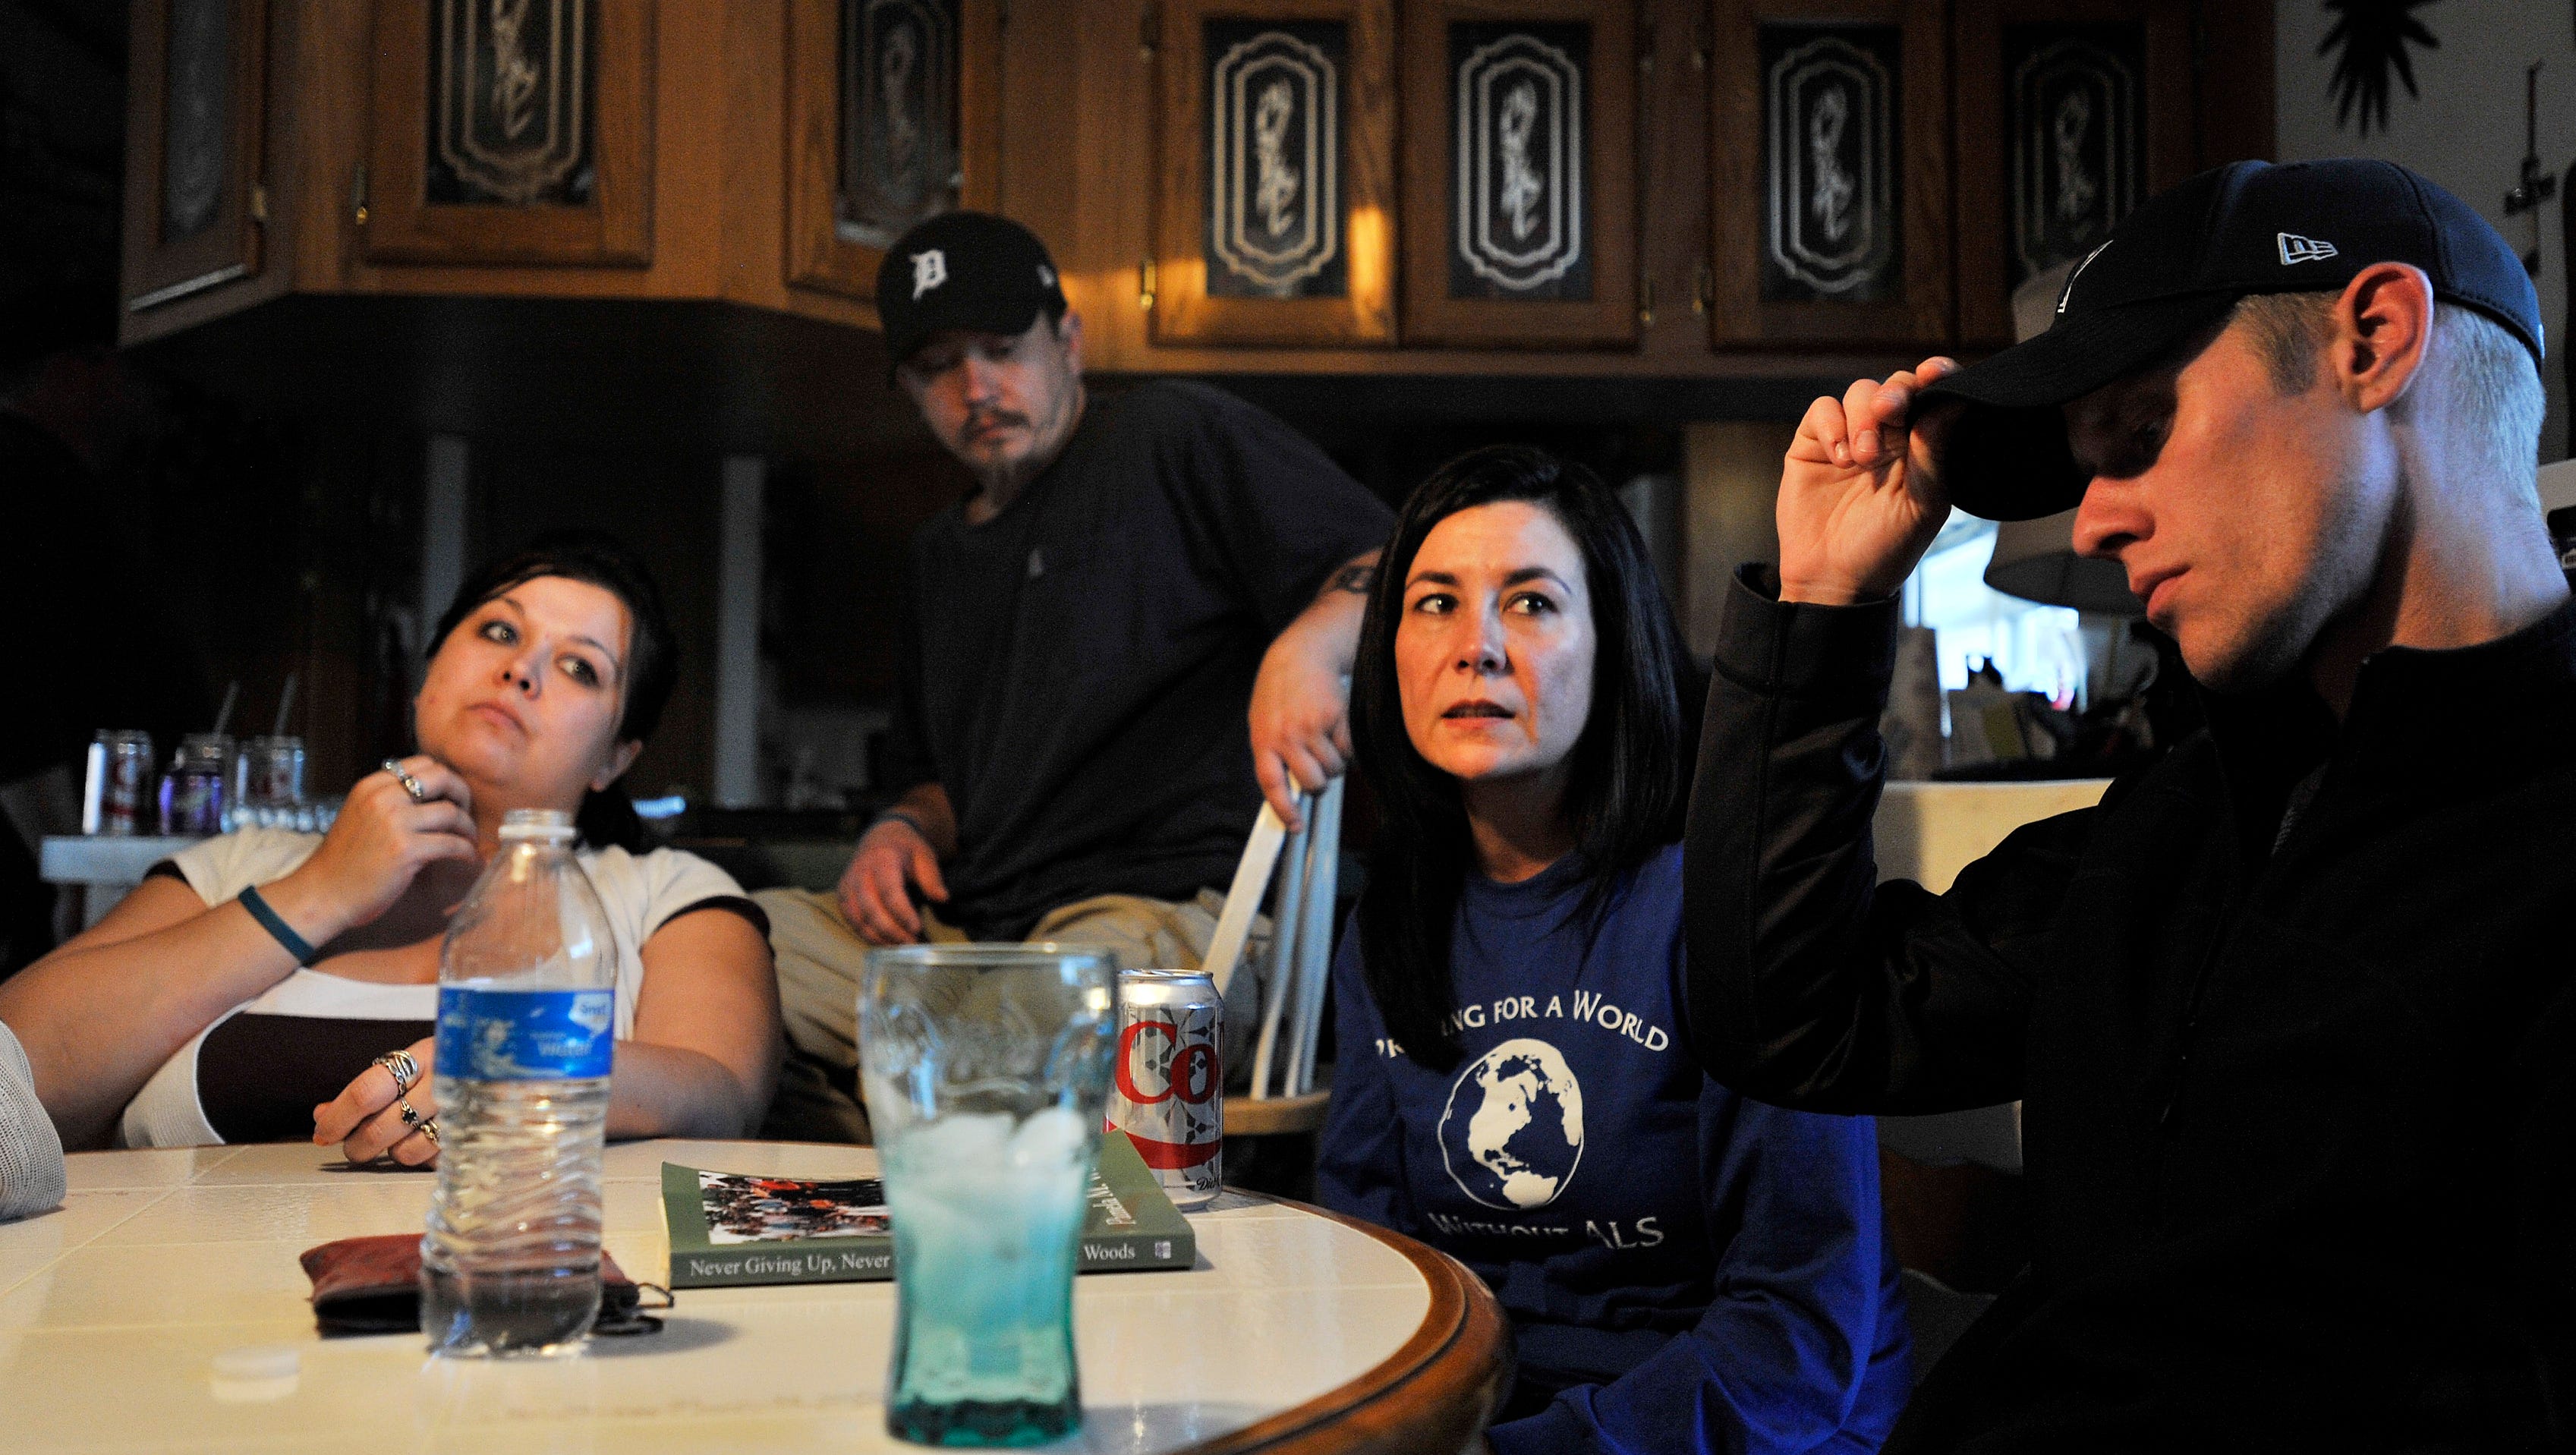 April Colvin, second from right, has started fundraising for her brother, Lucas Gutherie, and talks about his diagnosis with Lucas' wife, Shawna Gutherie, left, and Ryan Thiel, right, after a Sunday family meal.